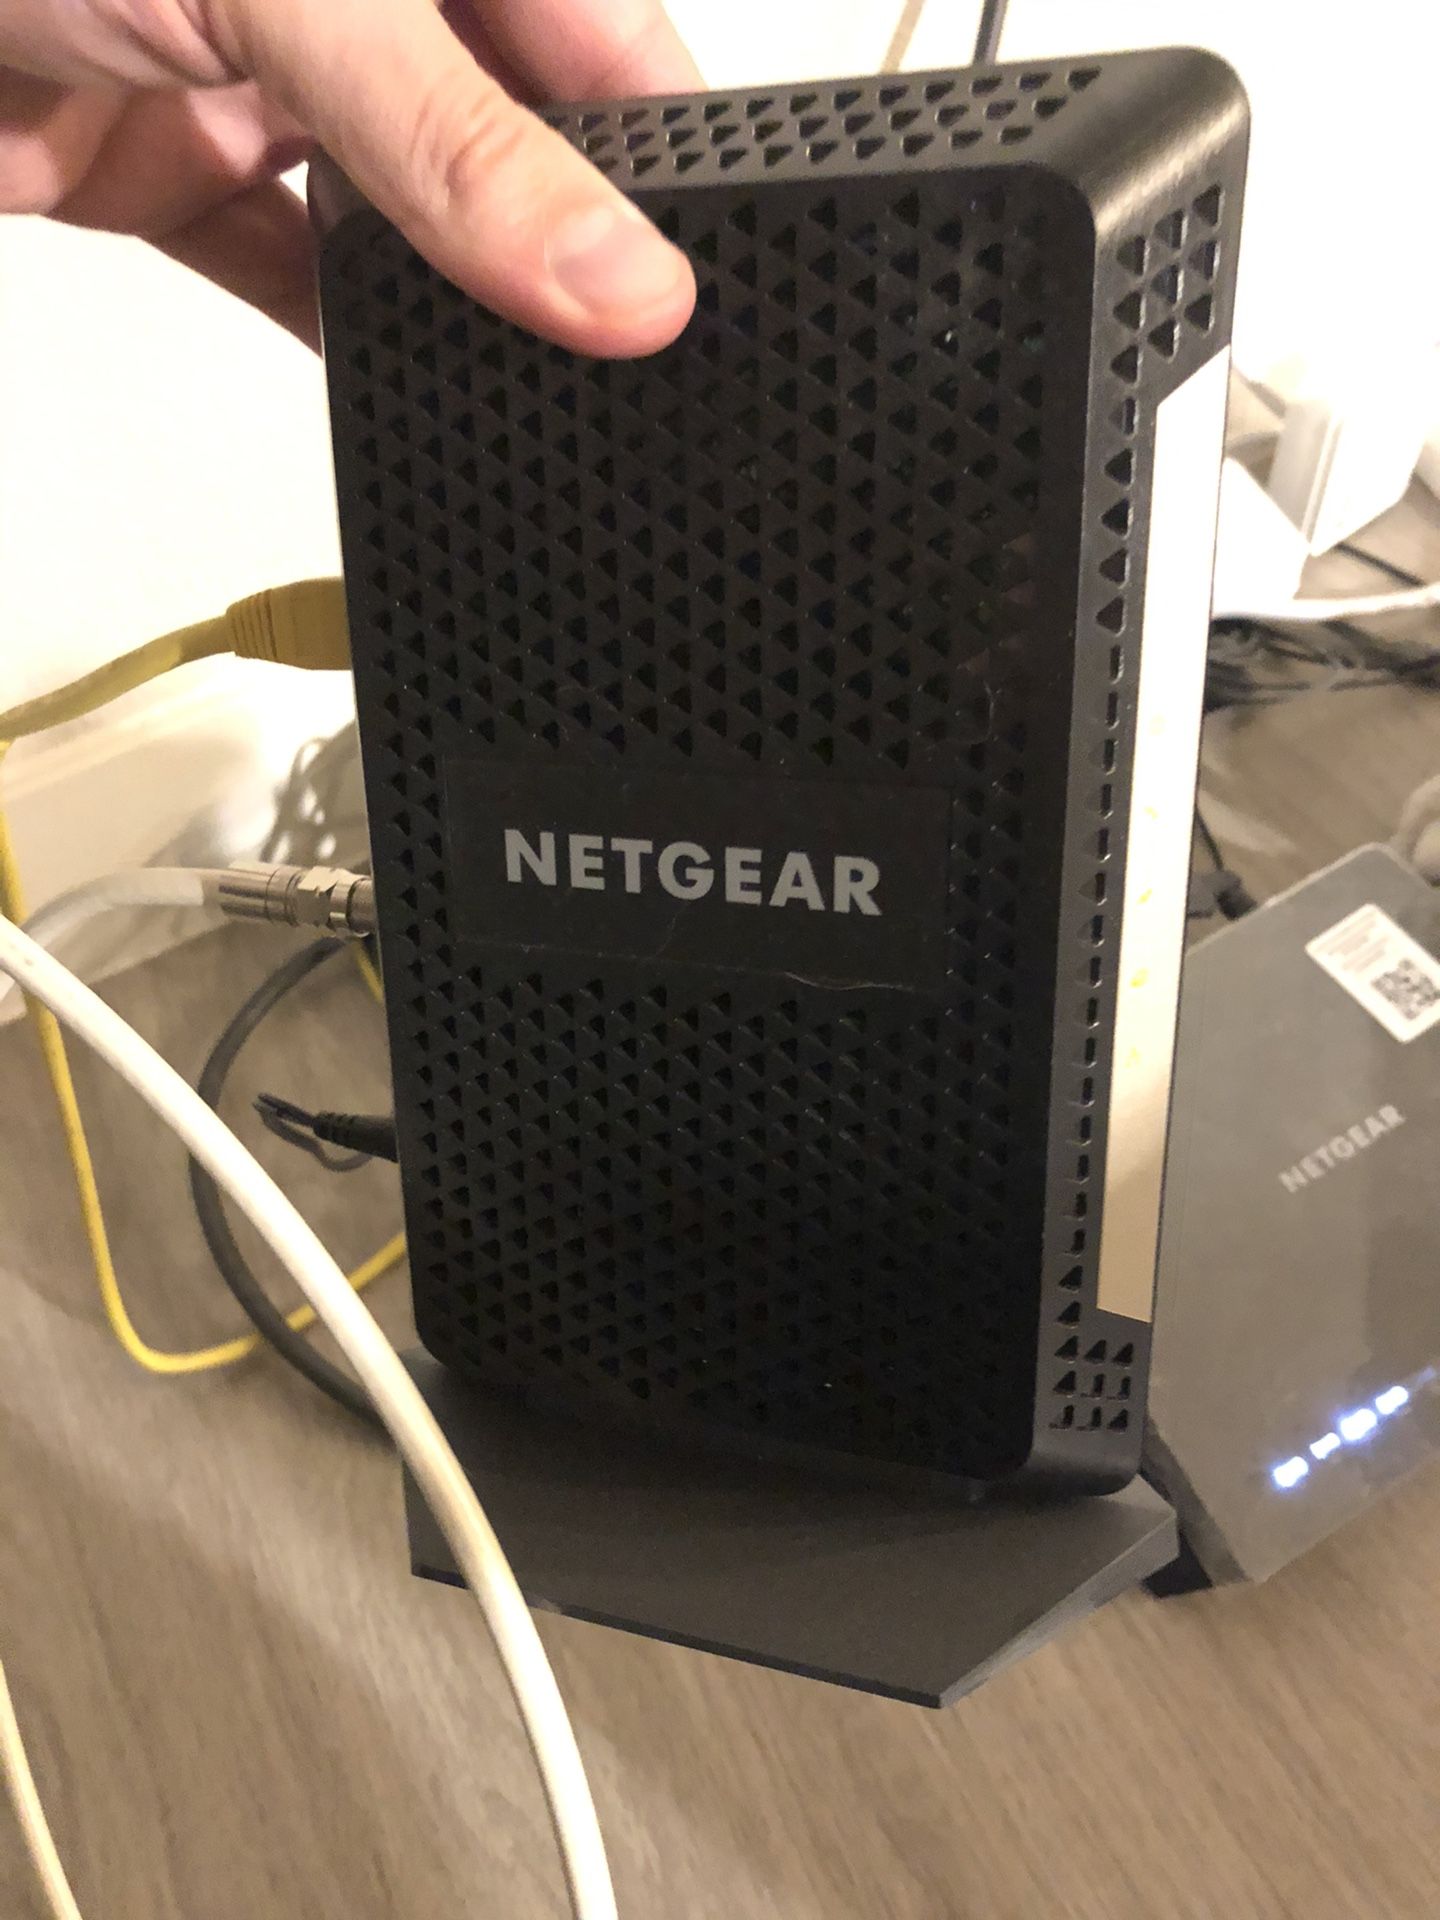 Netgear modem and router. Works with Cox